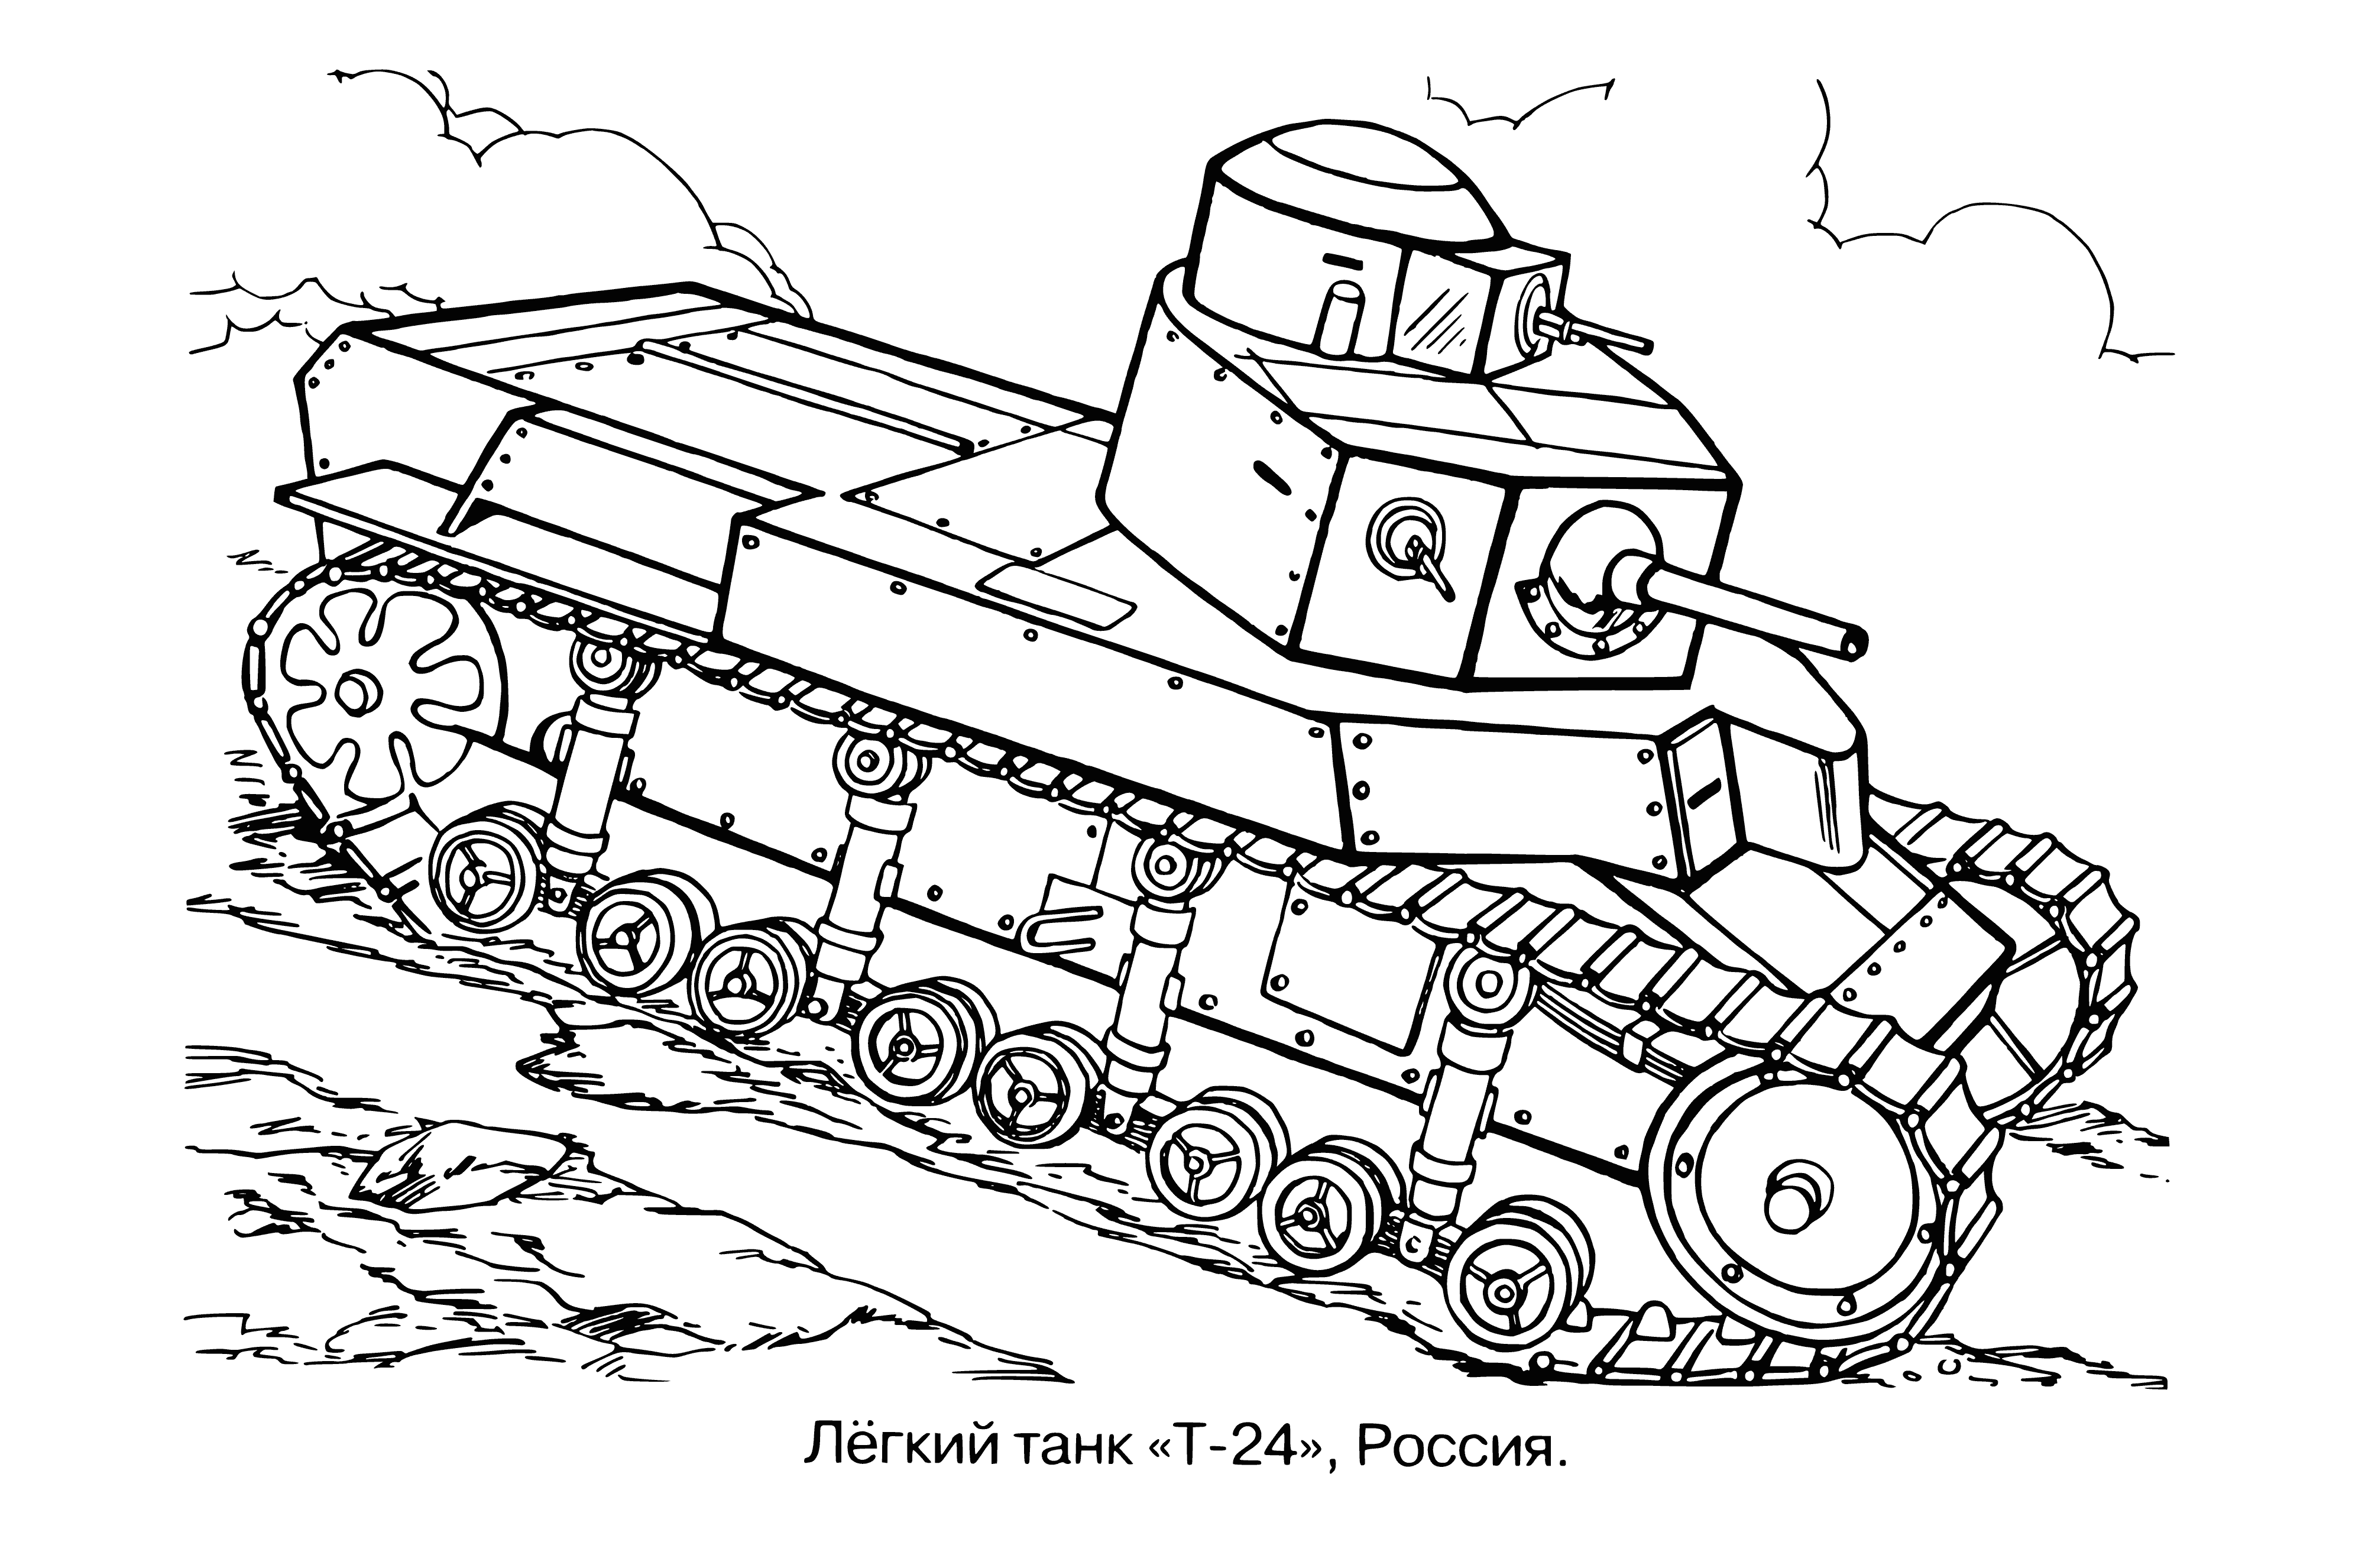 coloring page: Light tanks are fast and agile, smaller and lighter than other tanks, making them easier to maneuver for quick battlefield movement. #tanks